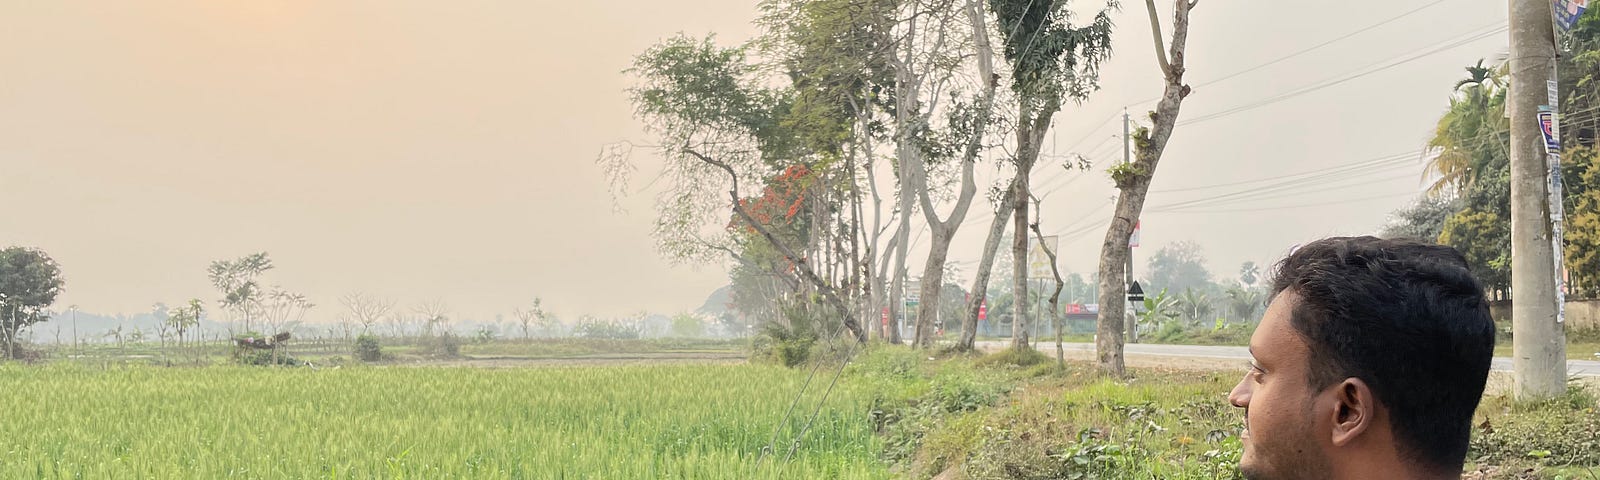 A man standing in a lush field of tall grass bordered by trees and a roadway looks skyward towards the sun blocked by haze.